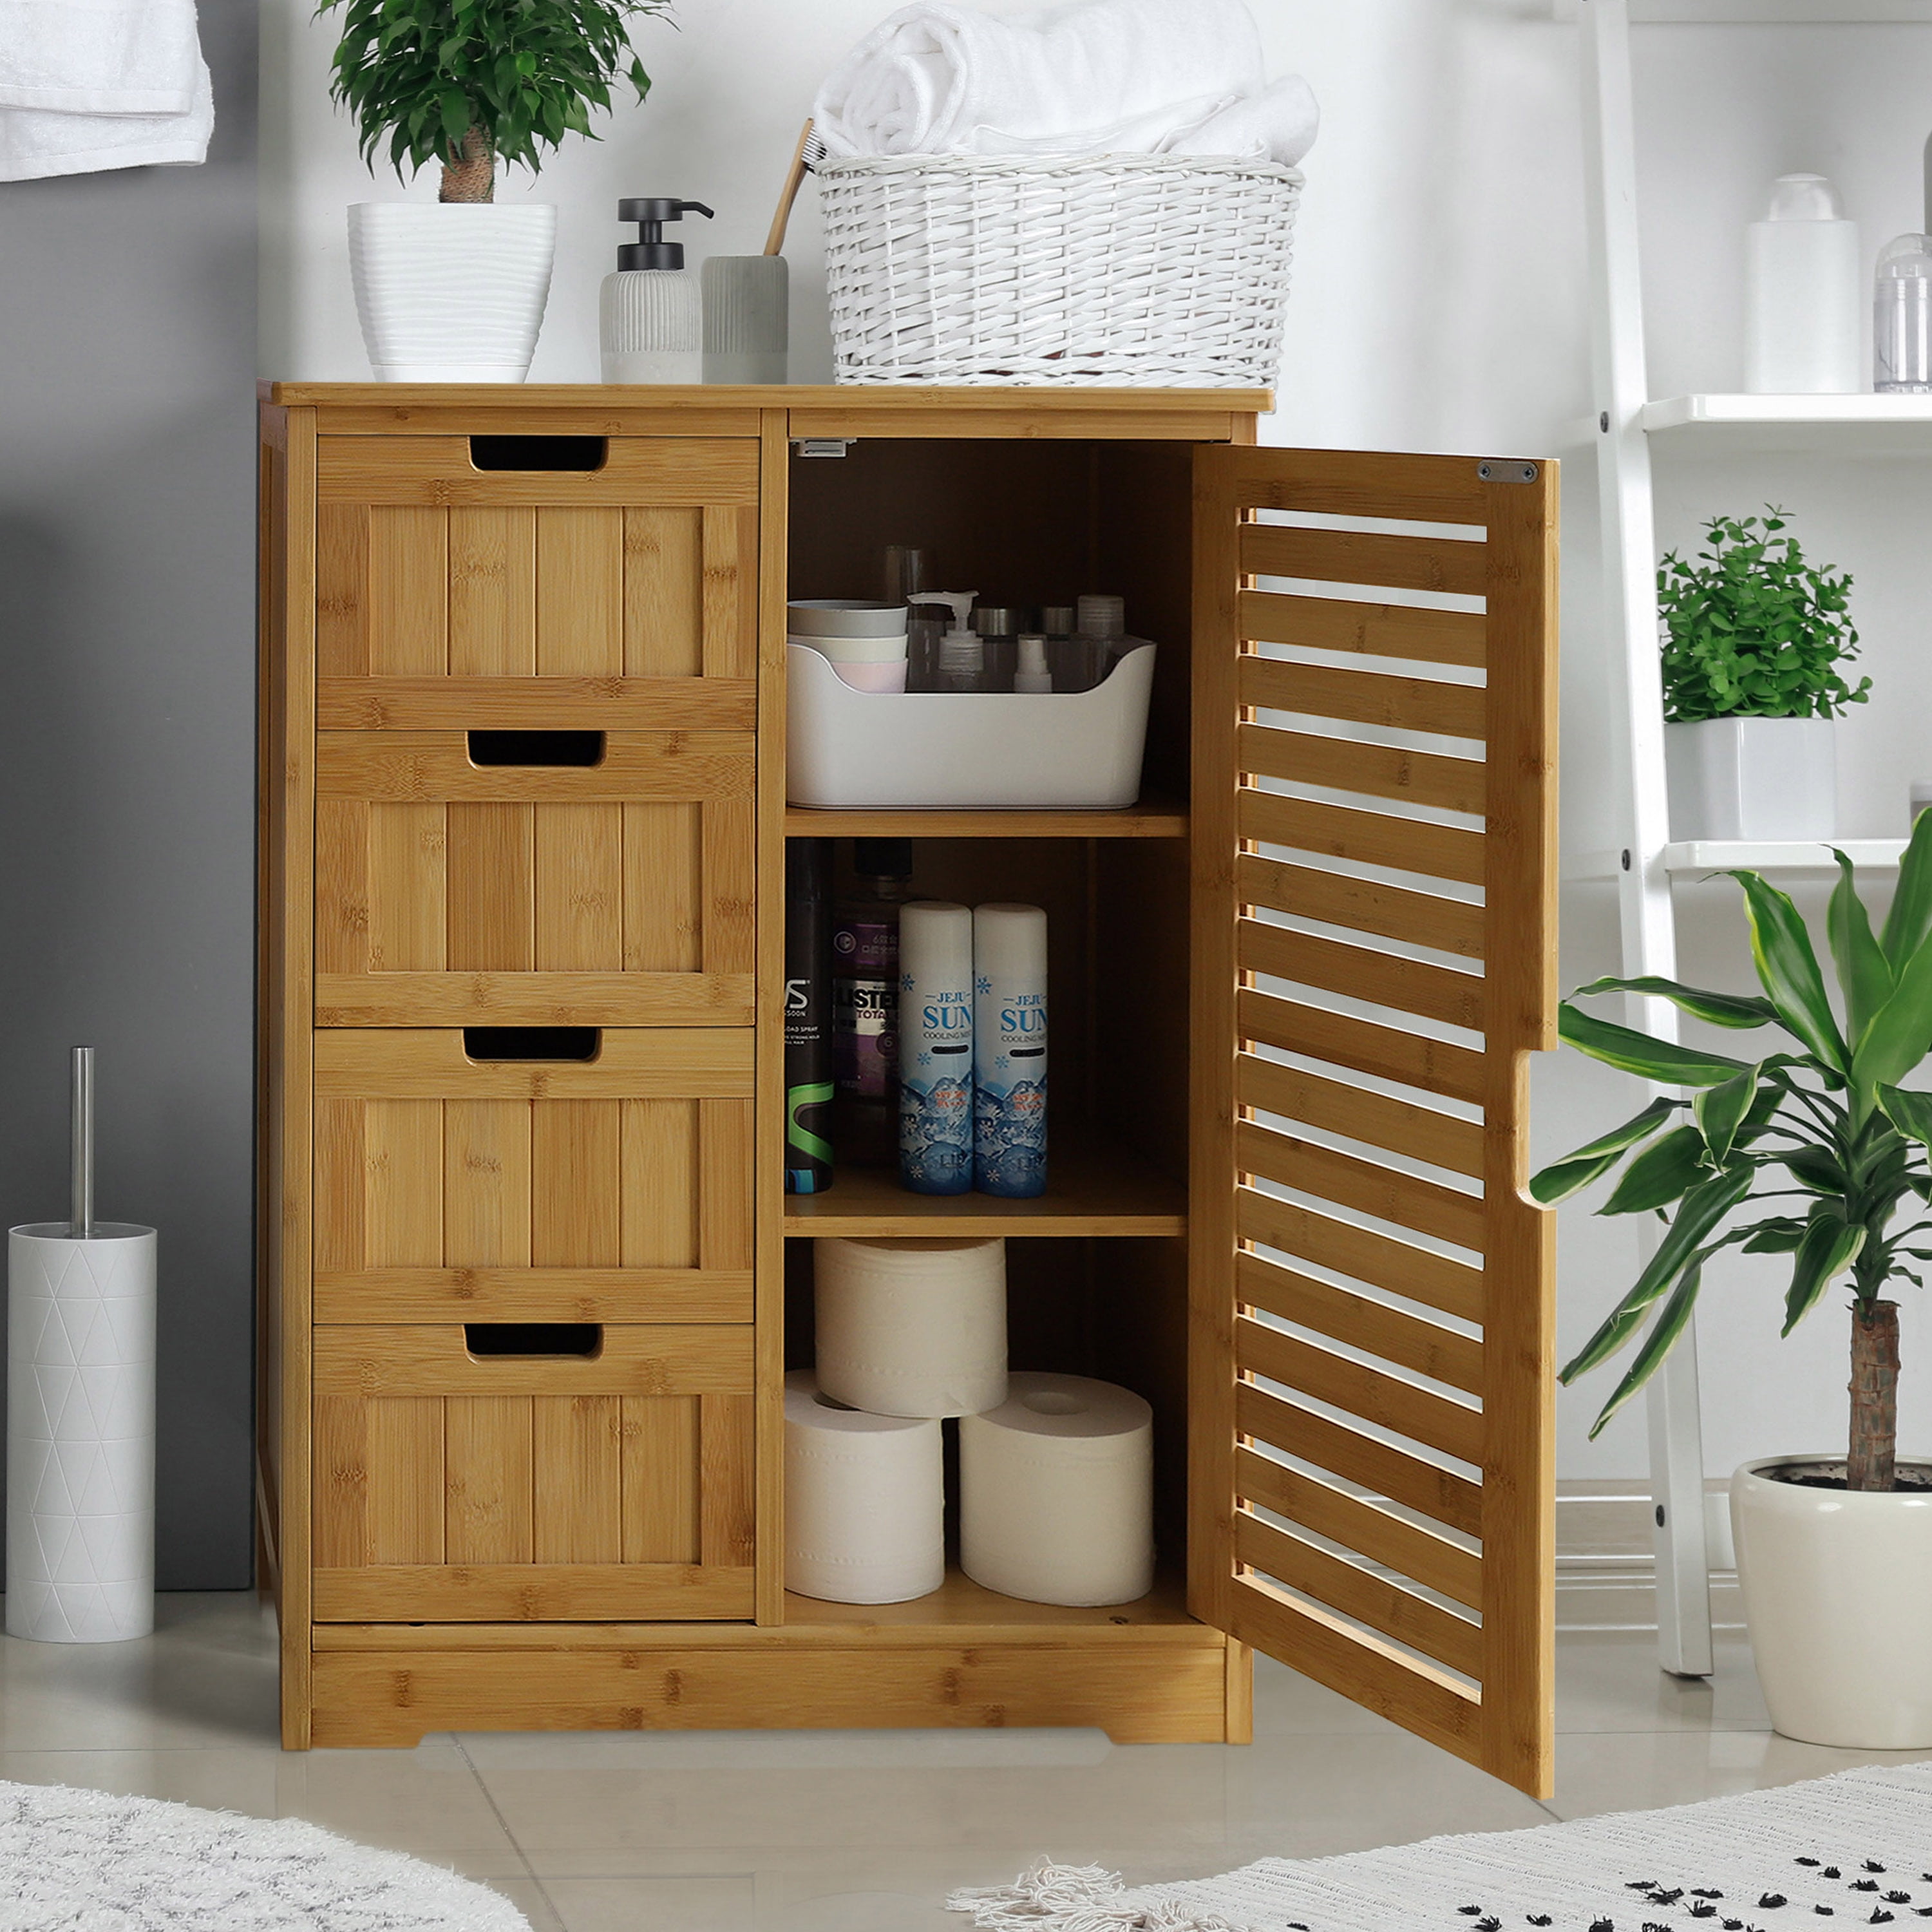  7 W Skinny Bathroom Storage Cabinet, Slim Toilet Paper Storage  Cabinet with Clear Drawers and Casters, Bathroom Floor Cabinet Storage Cart  for Small Spaces Gaps, Space Saving : Home & Kitchen